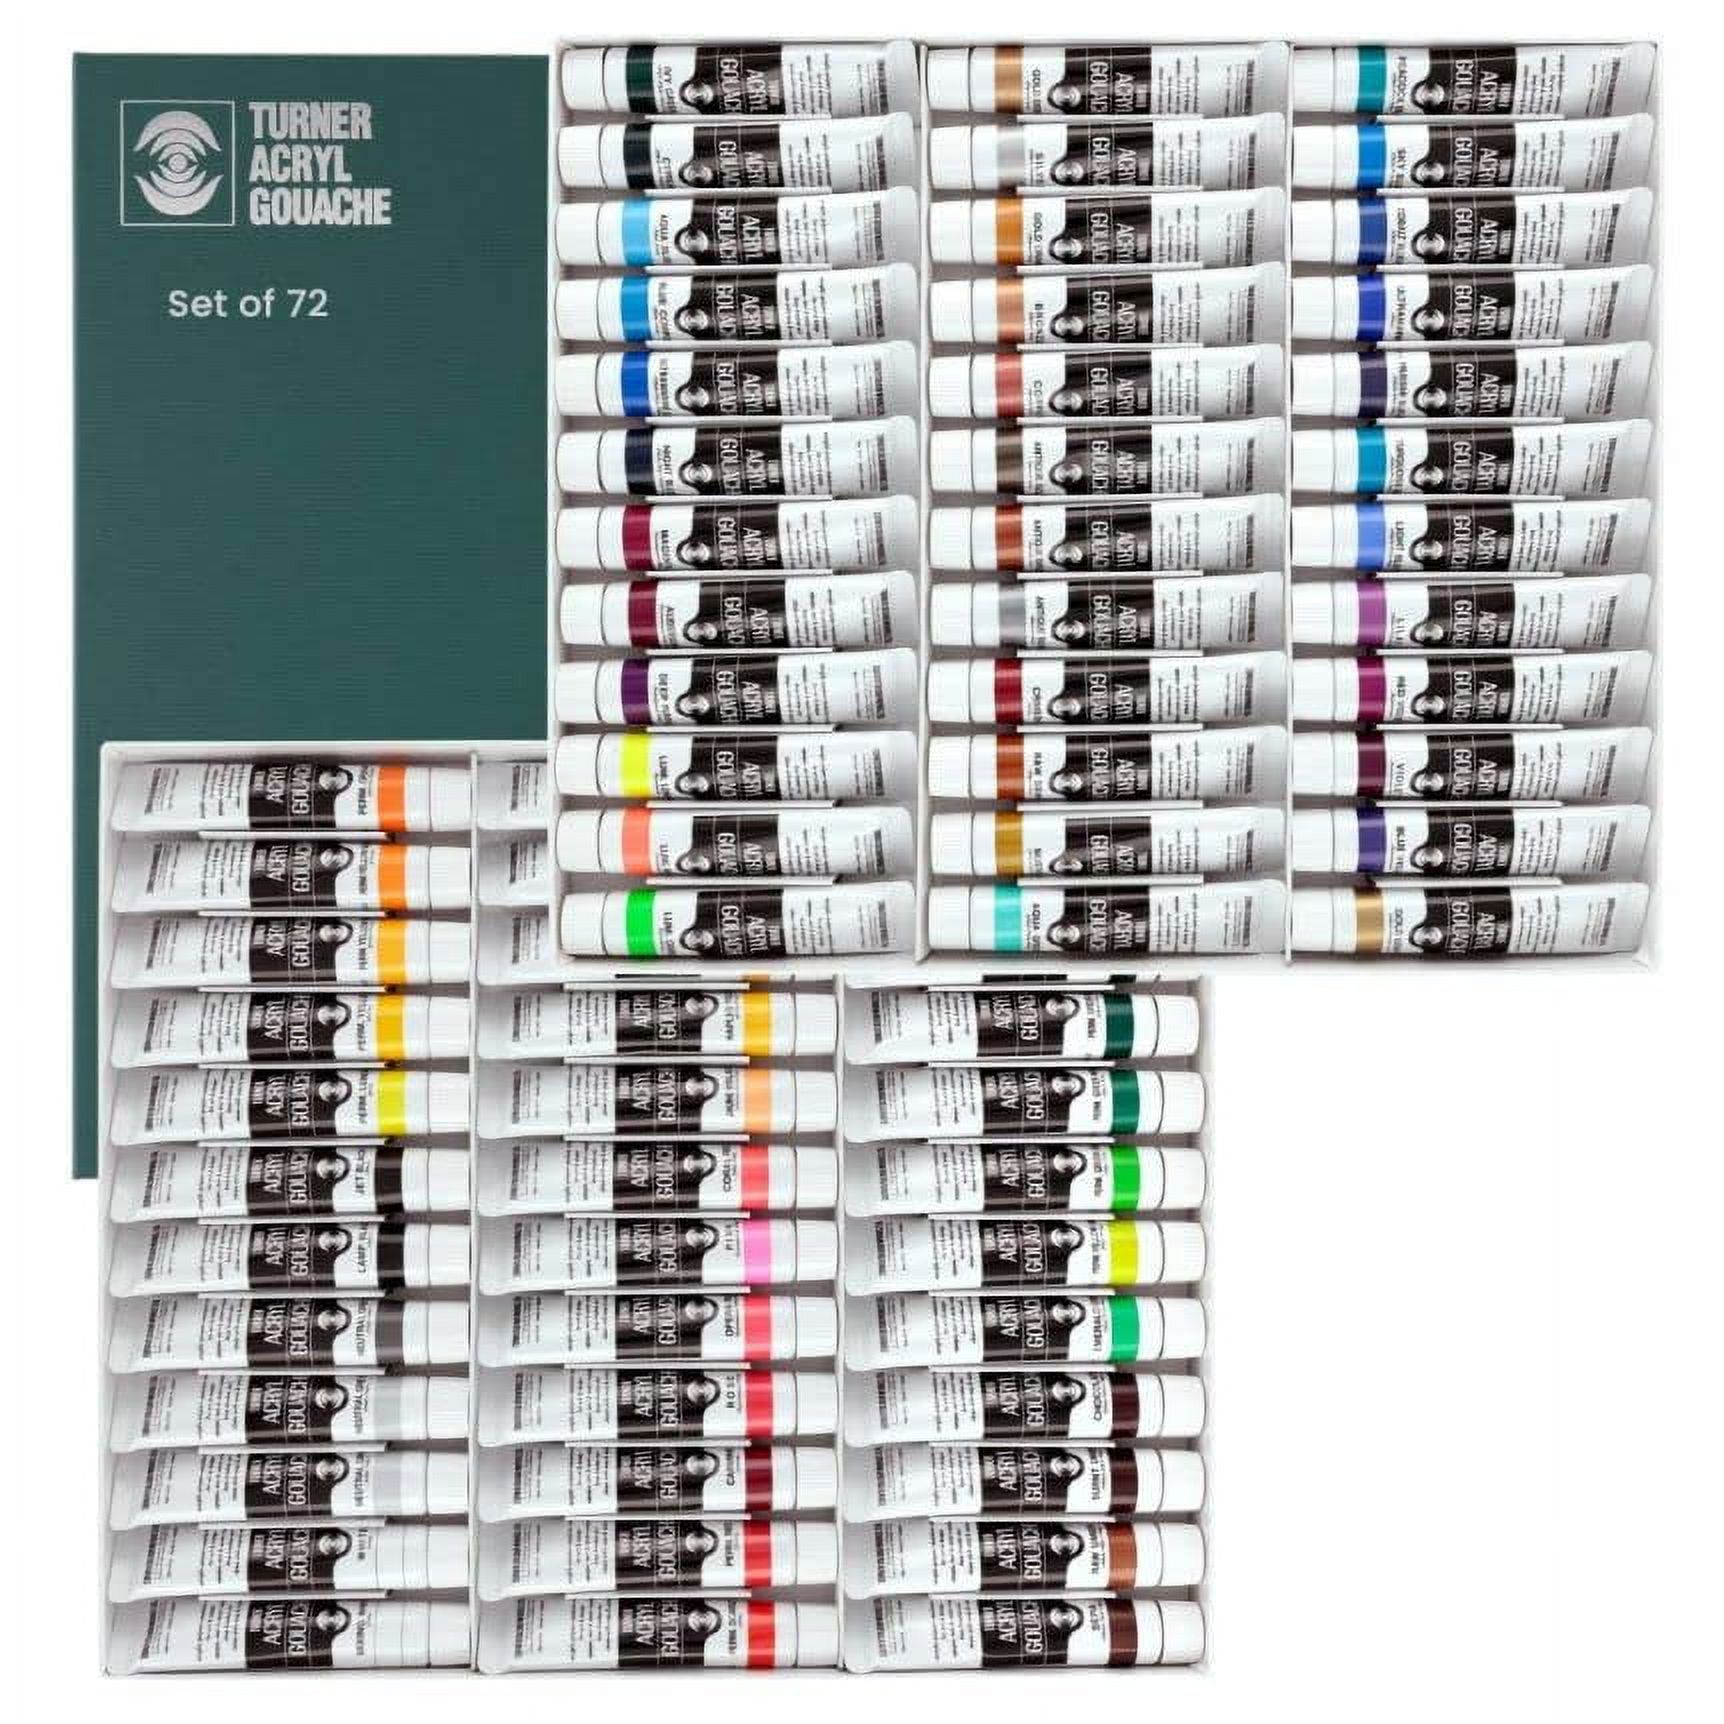 Turner Acrylic Paint Set Artist Acryl Gouache - Super Concentrated Vibrant Acrylics, Fast Drying, Velvety Matte Finish - [Set of 72 | 20 ml Tubes]